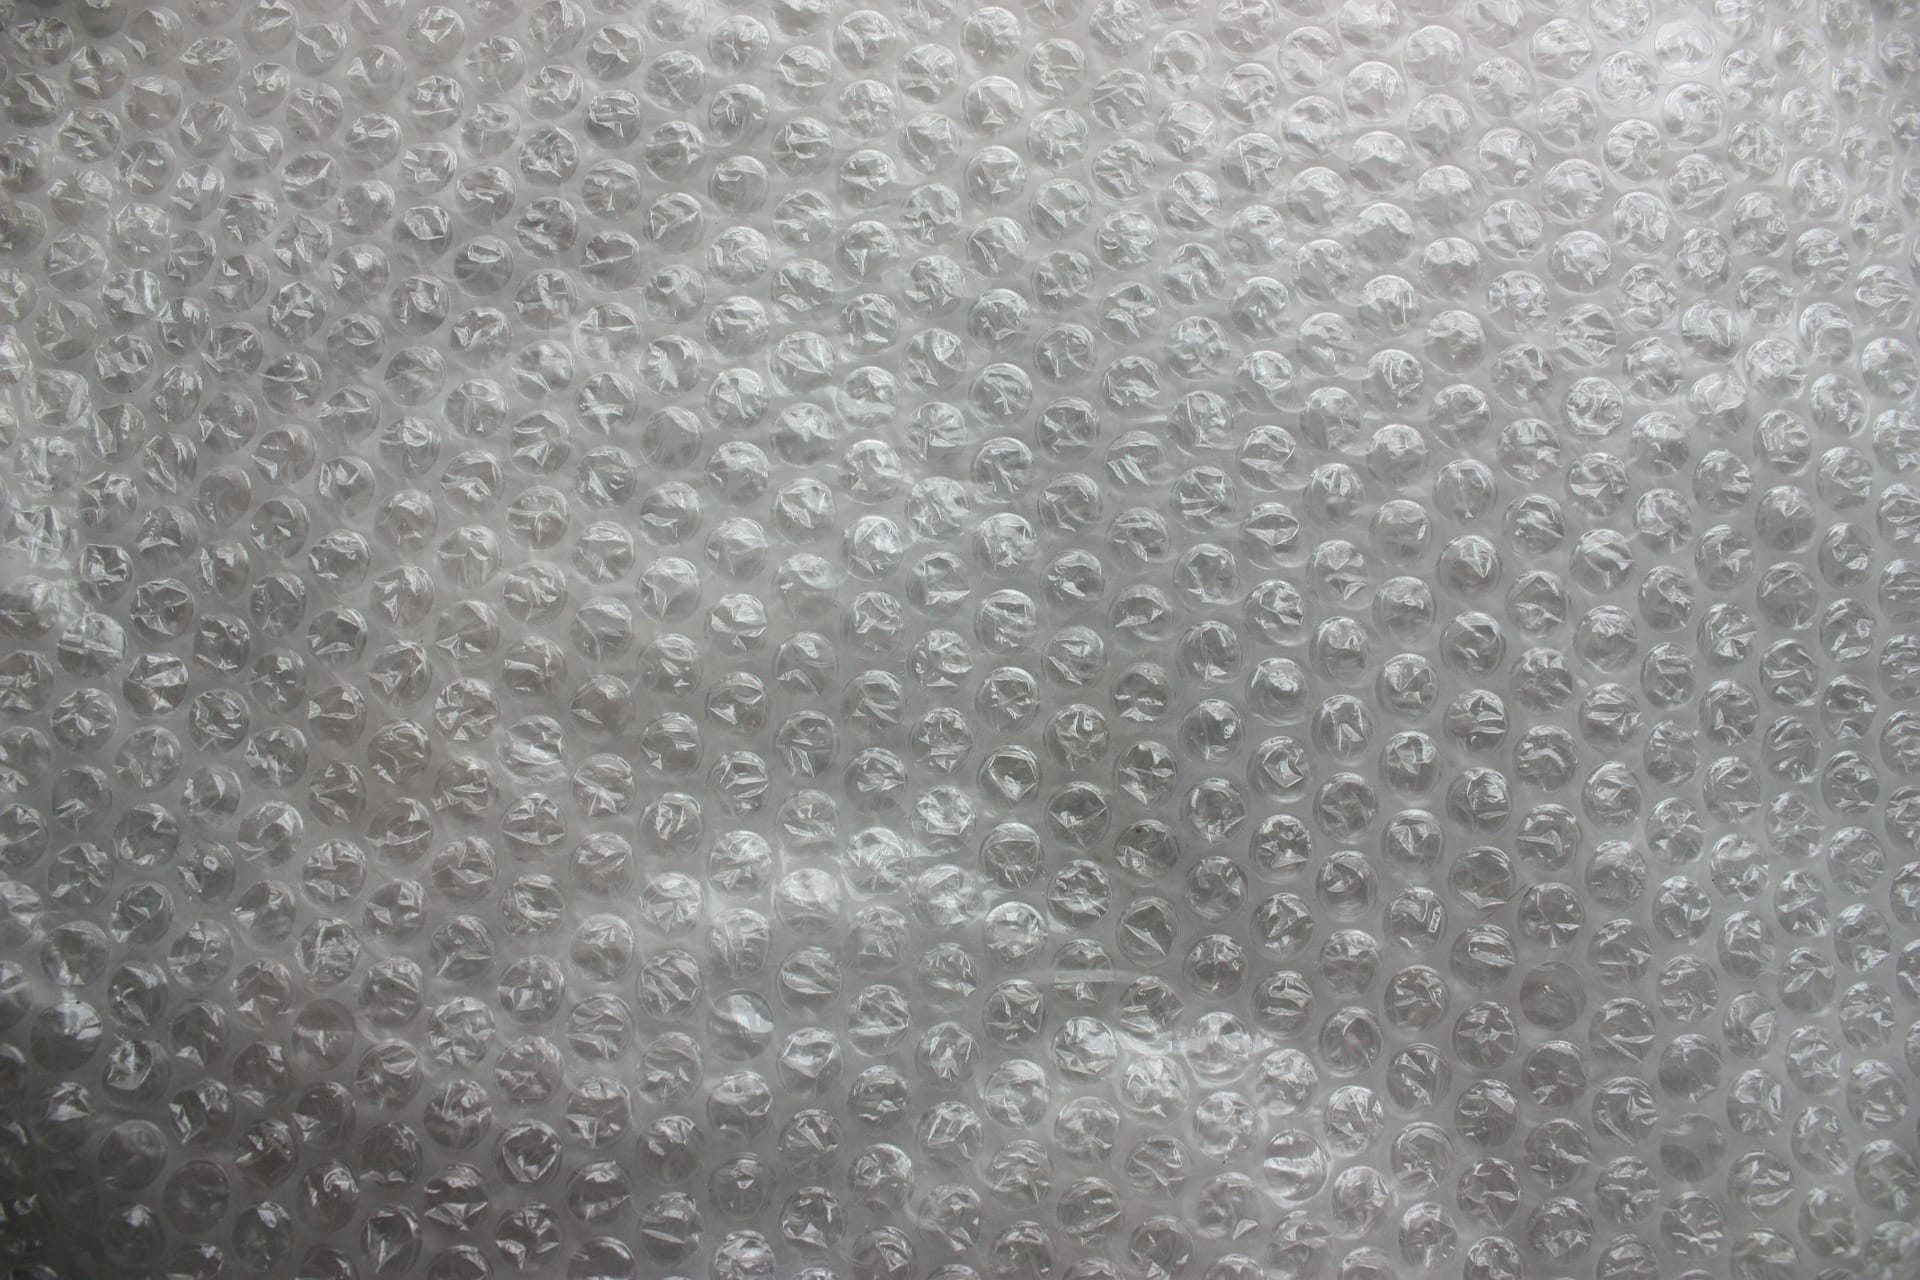 Where to find free shipping supplies bubble wrap, bubble roll, etc.